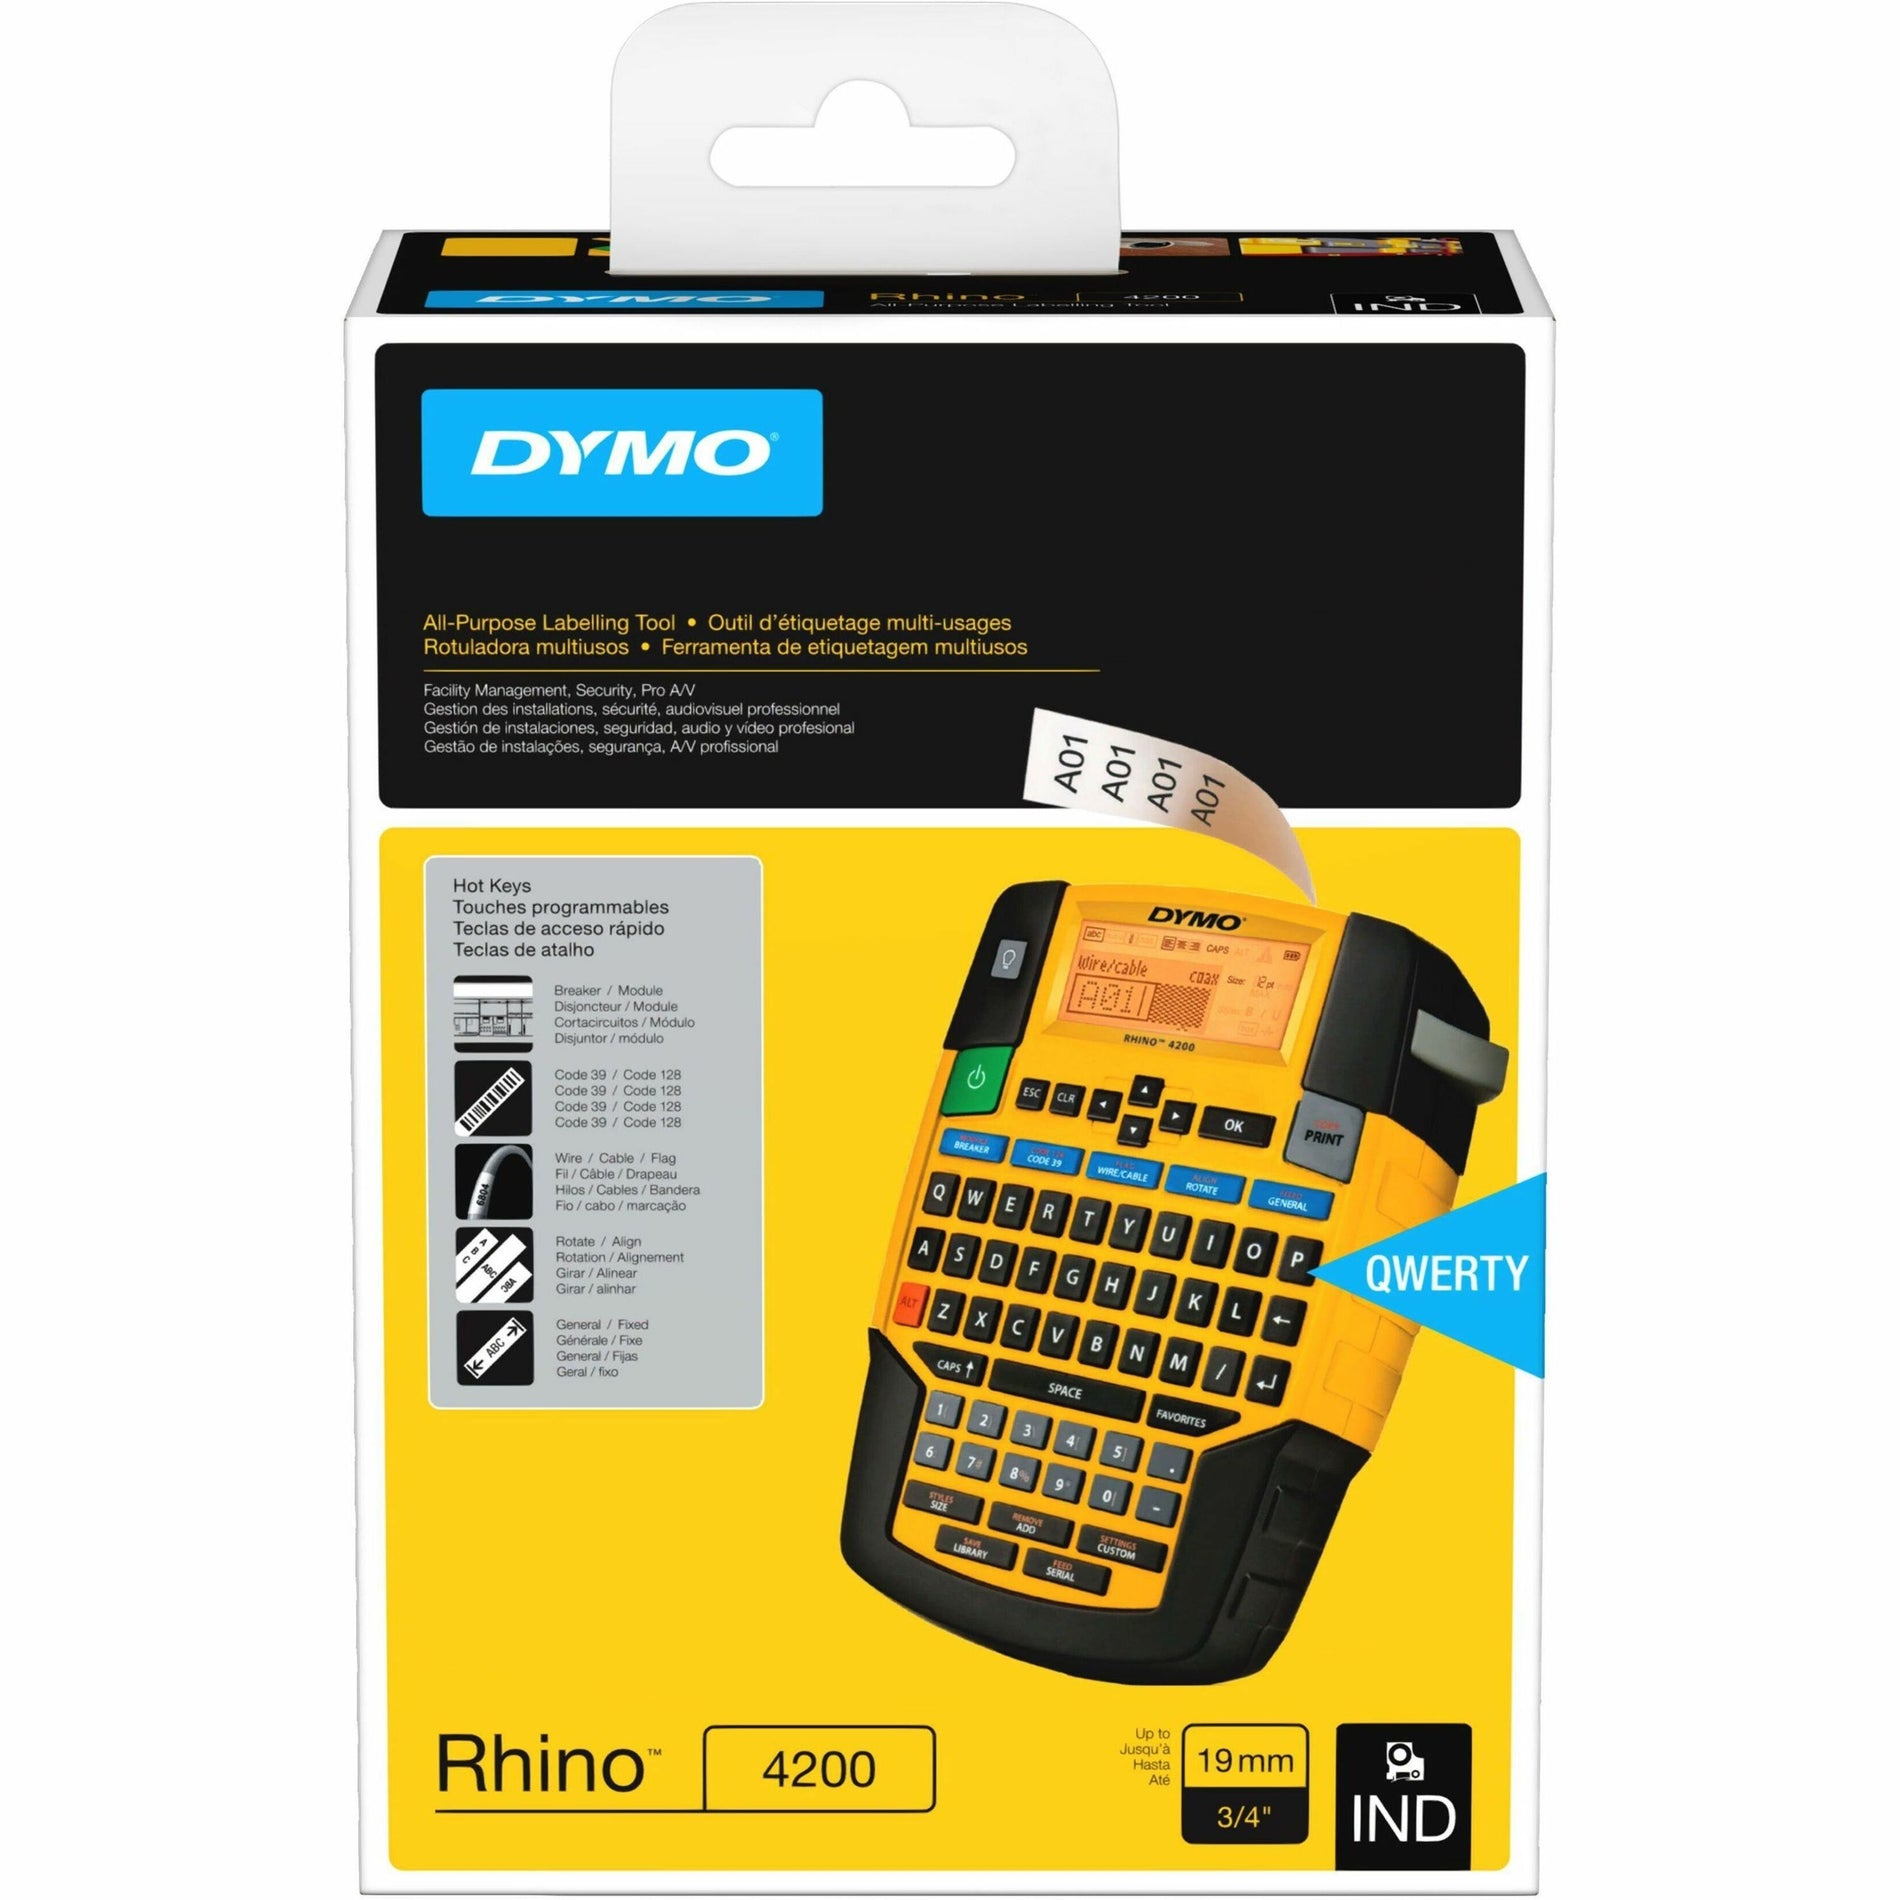 Dymo 2175088 Rhino 4200 Label Maker, Thermal Transfer, QWERTY, LCD Display, Battery Powered